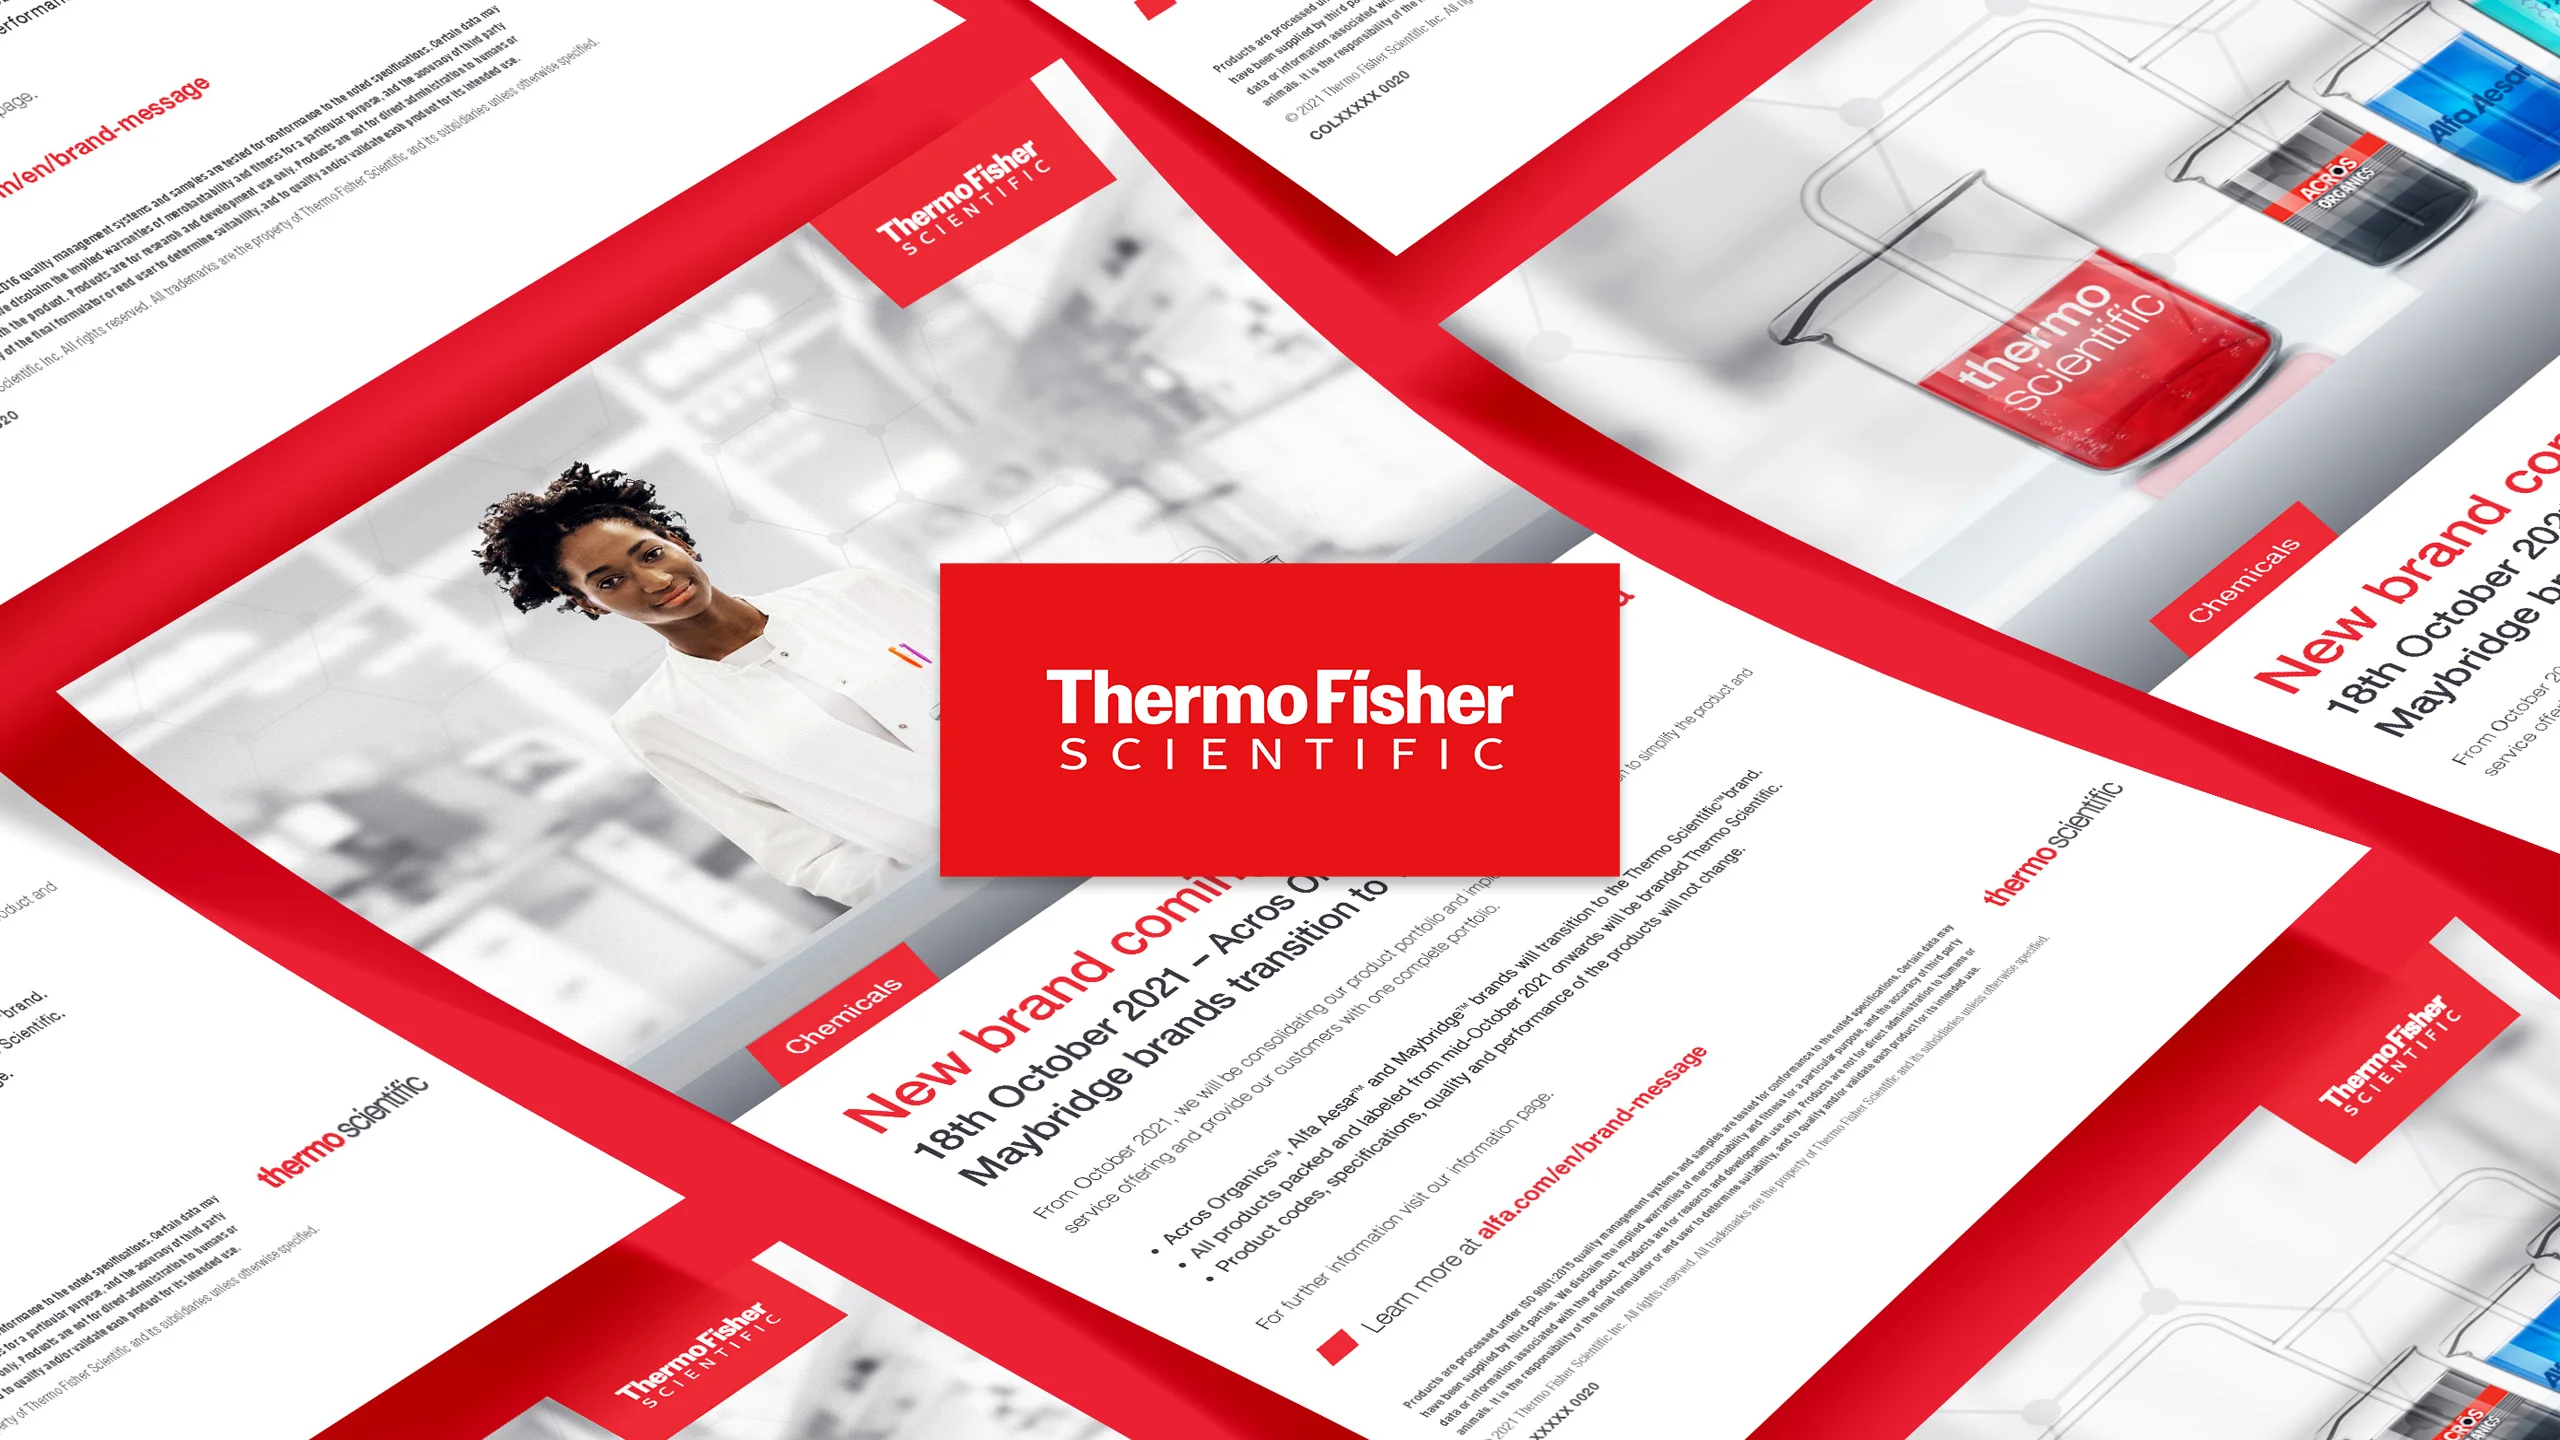 Thermo 001 2560X1440 WEBP